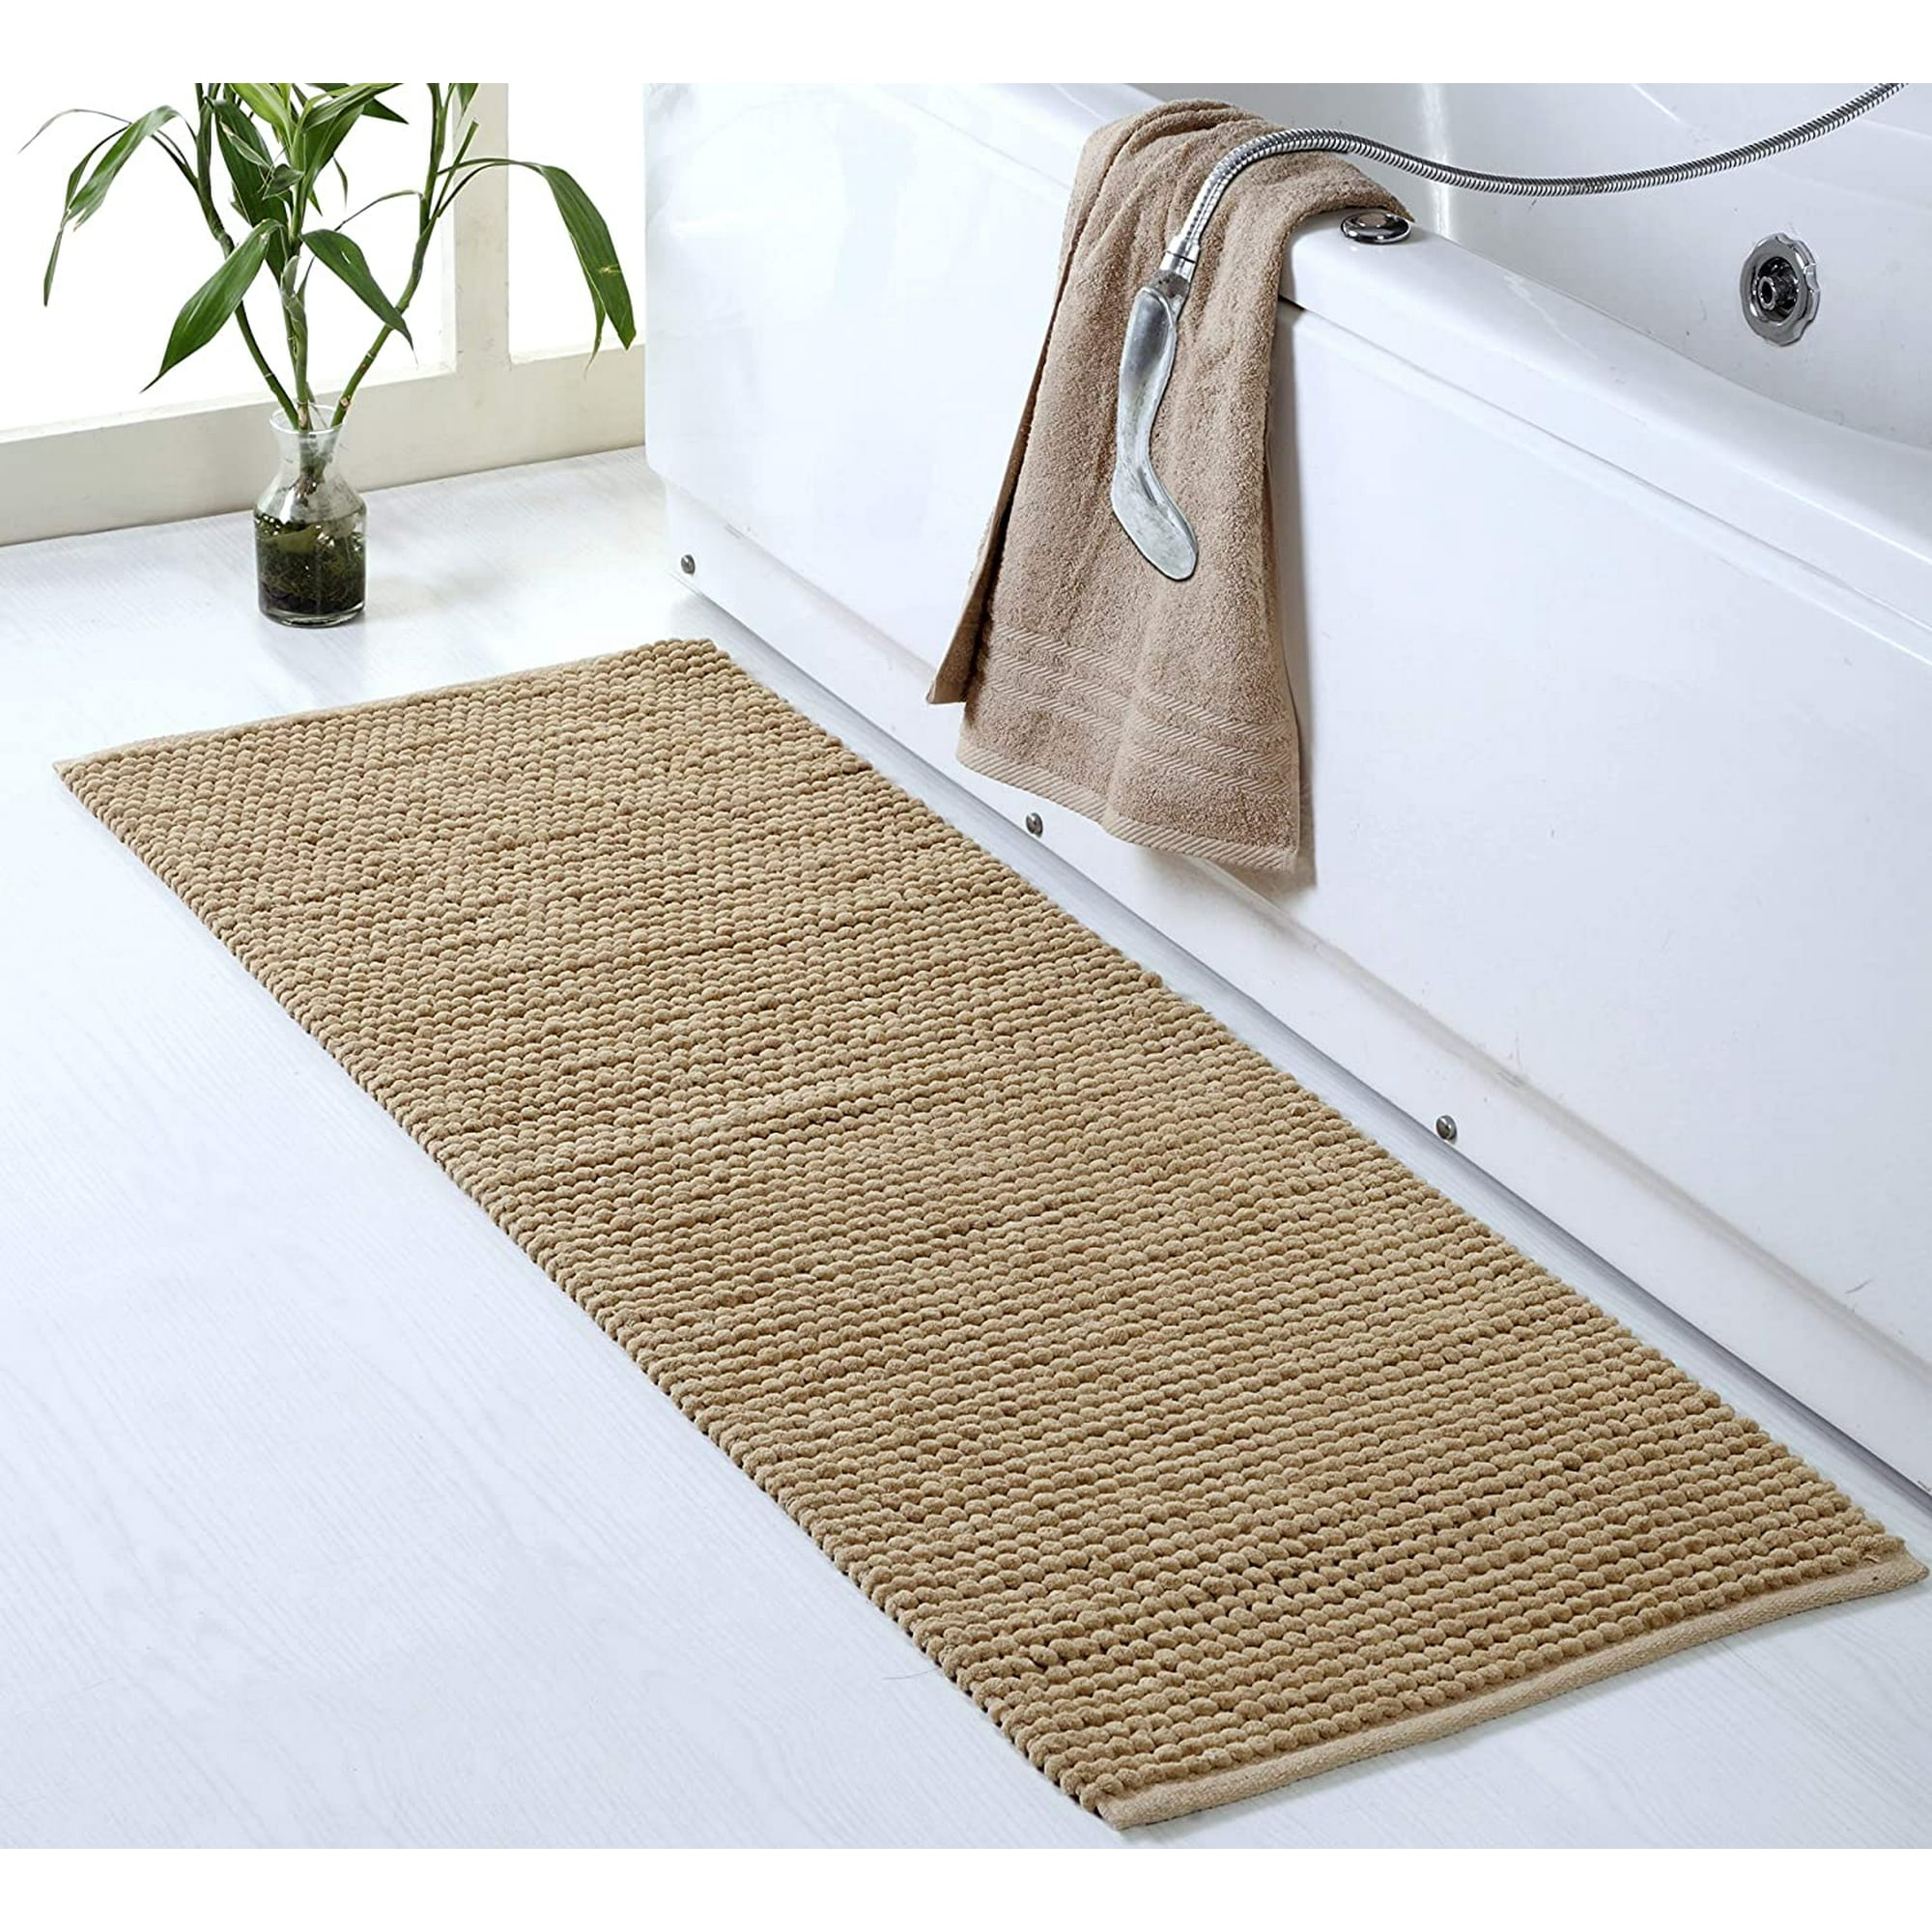 and Toilet-Sable Perfect Bath Mat for Shower Machine Washable Bath Tub 22x60 Inch Sink Taupe Extra Long Bath Rug Vanity Ultra Soft Plush Absorbent Micro Cotton Popcorn Bath Rug 